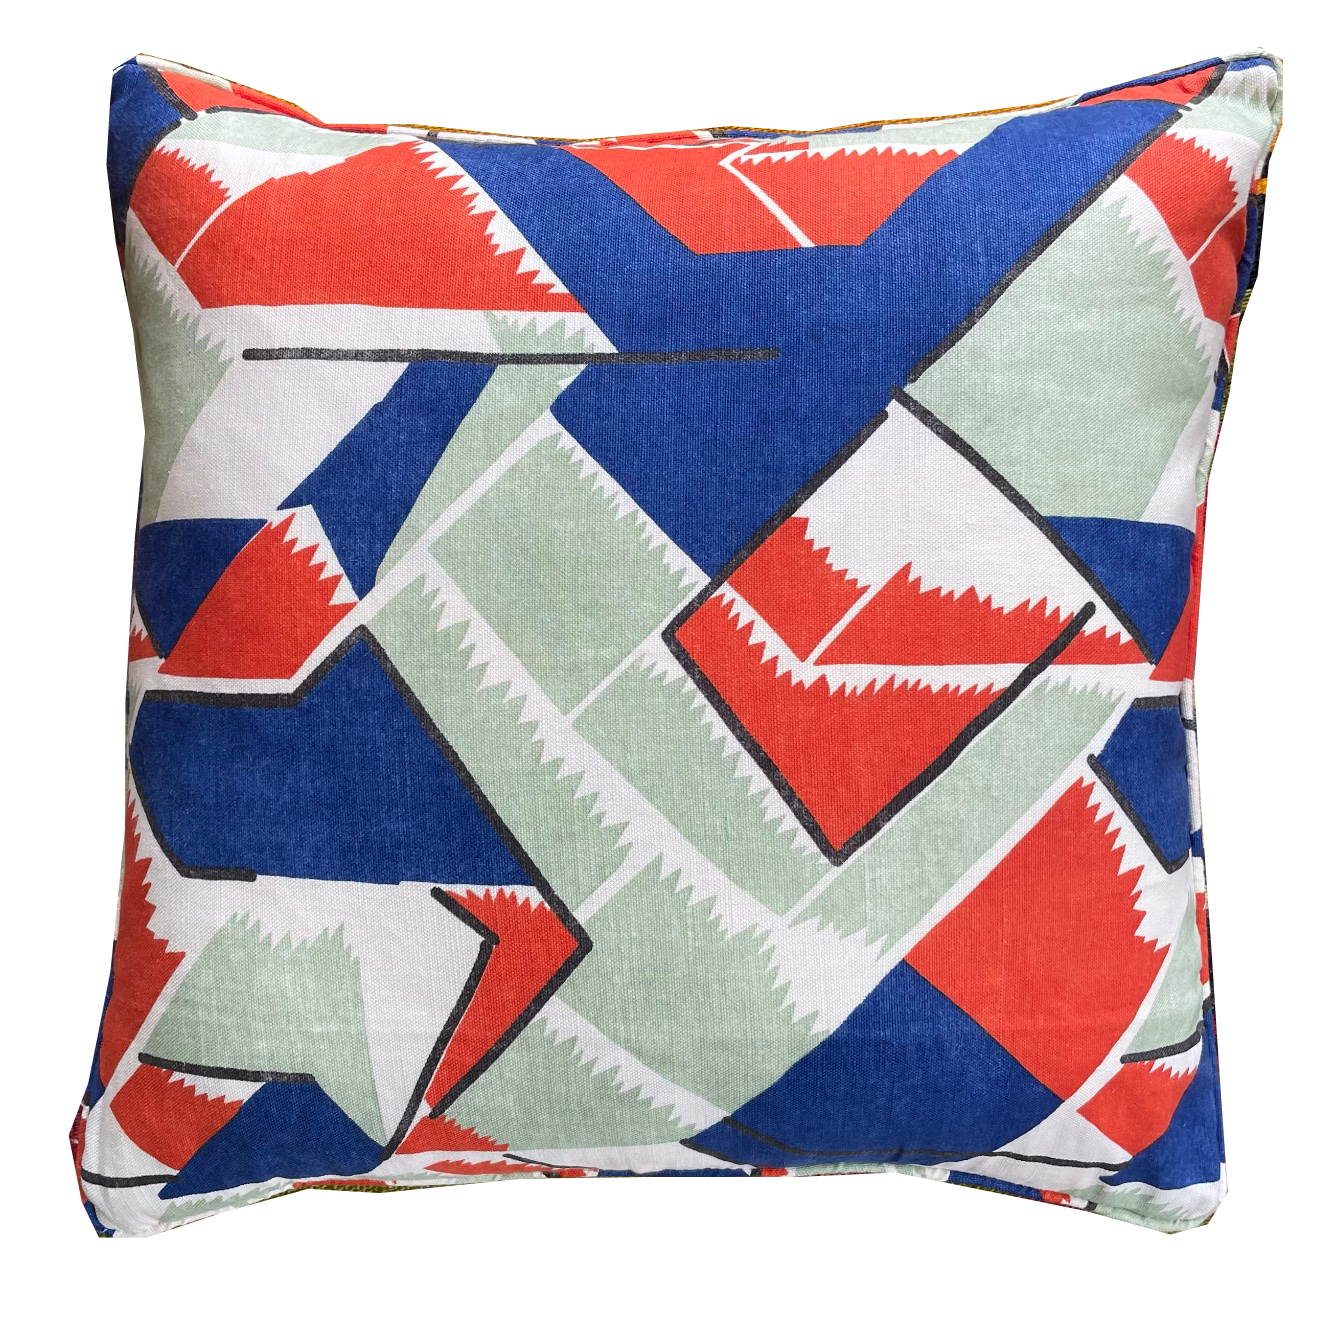 Bloomsbury Abstract Cushion - Blue/Red/Sage